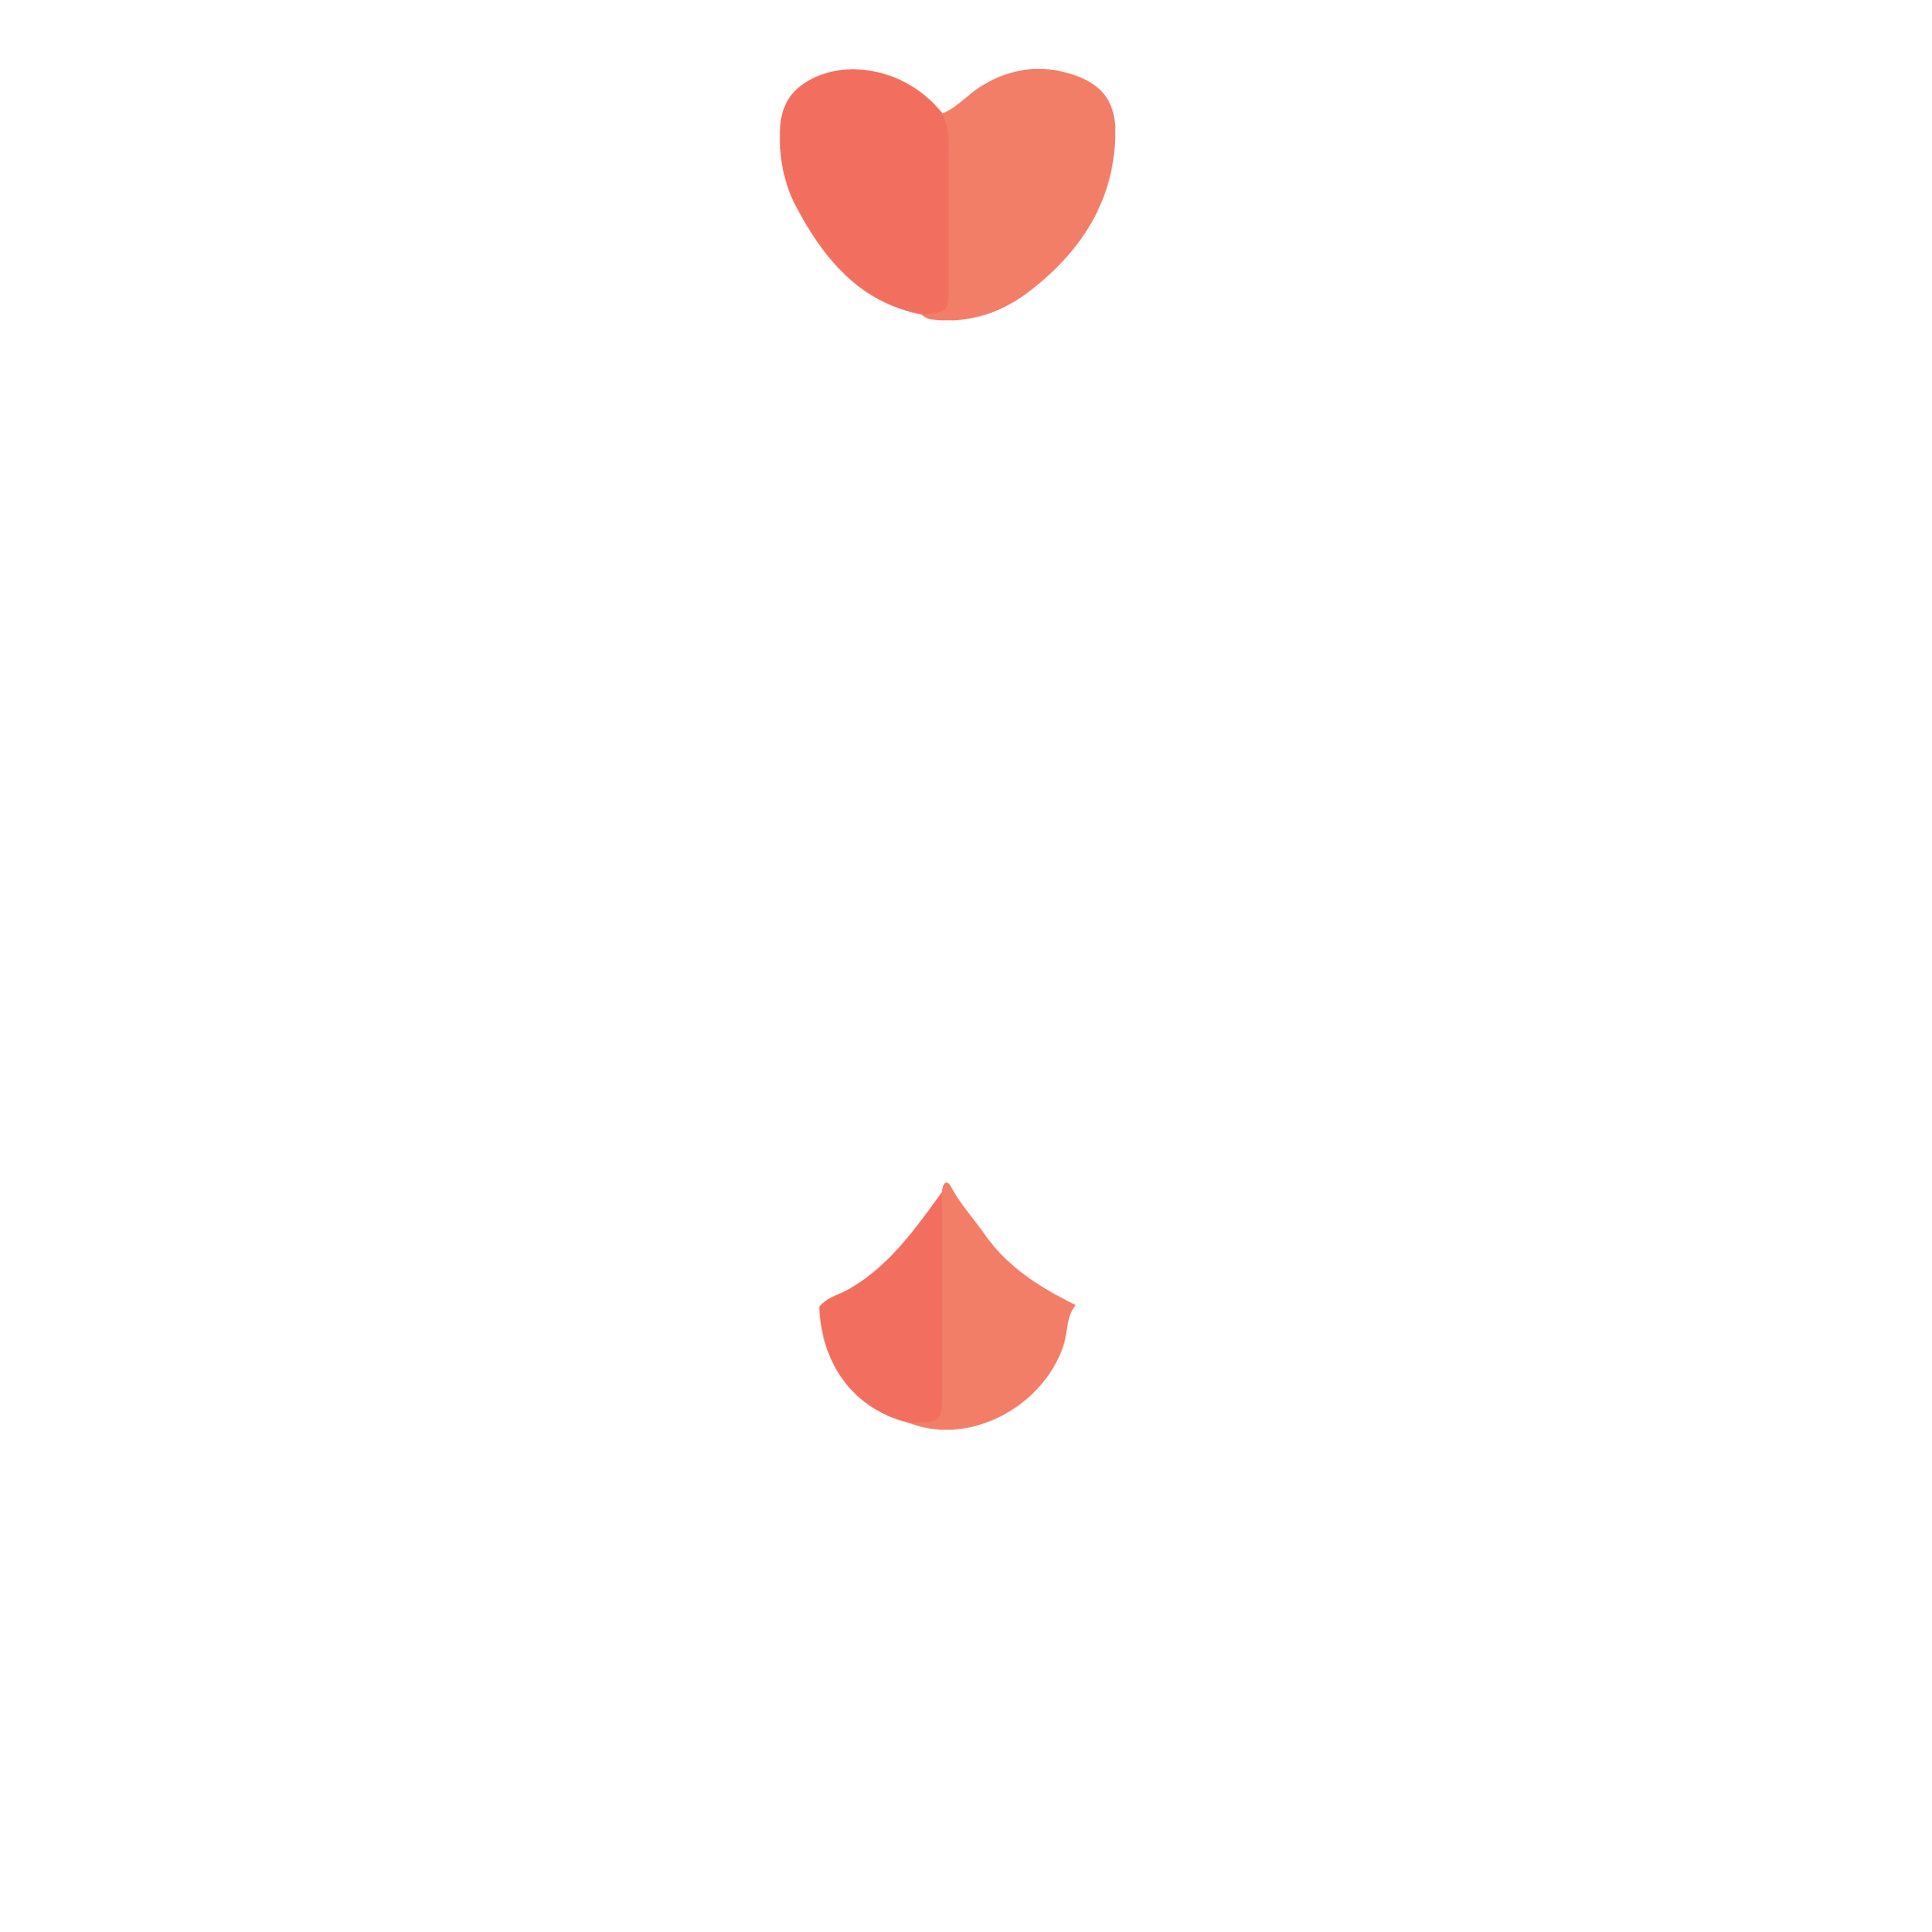 Cincinnati Animal CARE Humane Society - Adopt, Foster, and Rescue